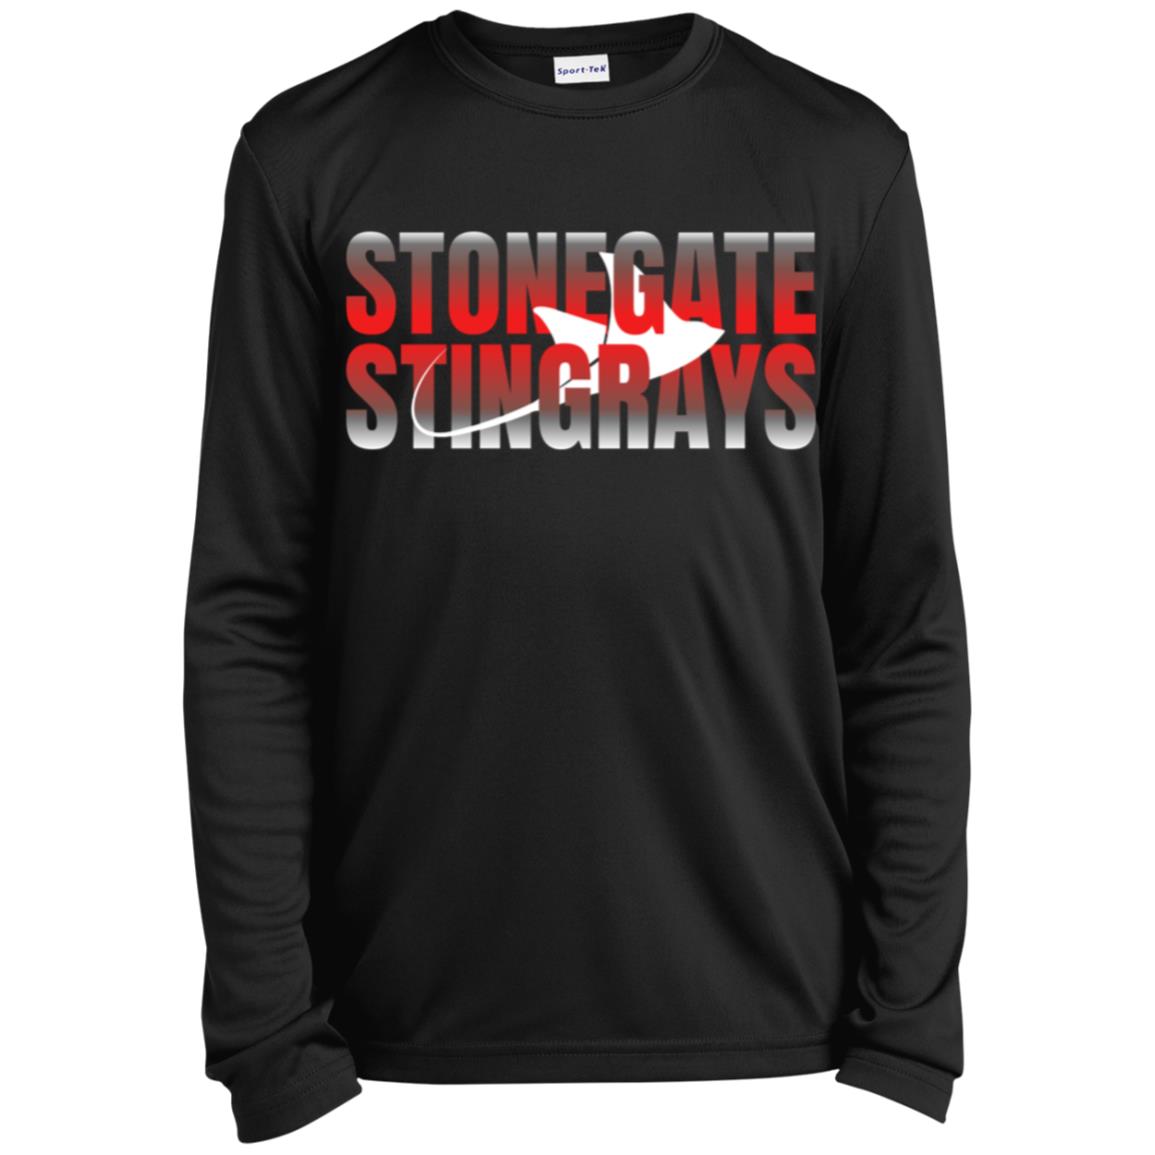 Youth Long Sleeve Performance T-Shirt